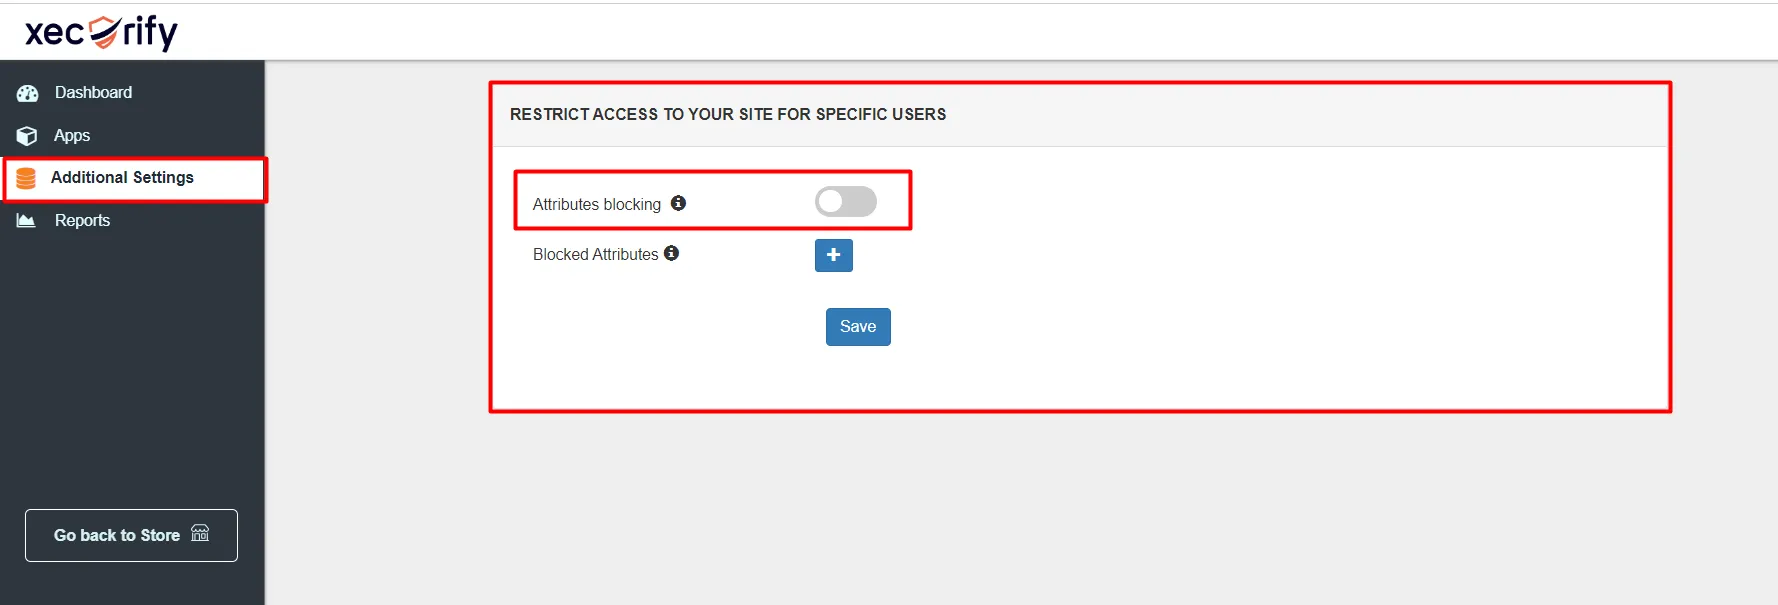 Shopify as IDP - Login using Shopify credentials - Attribute Blocking